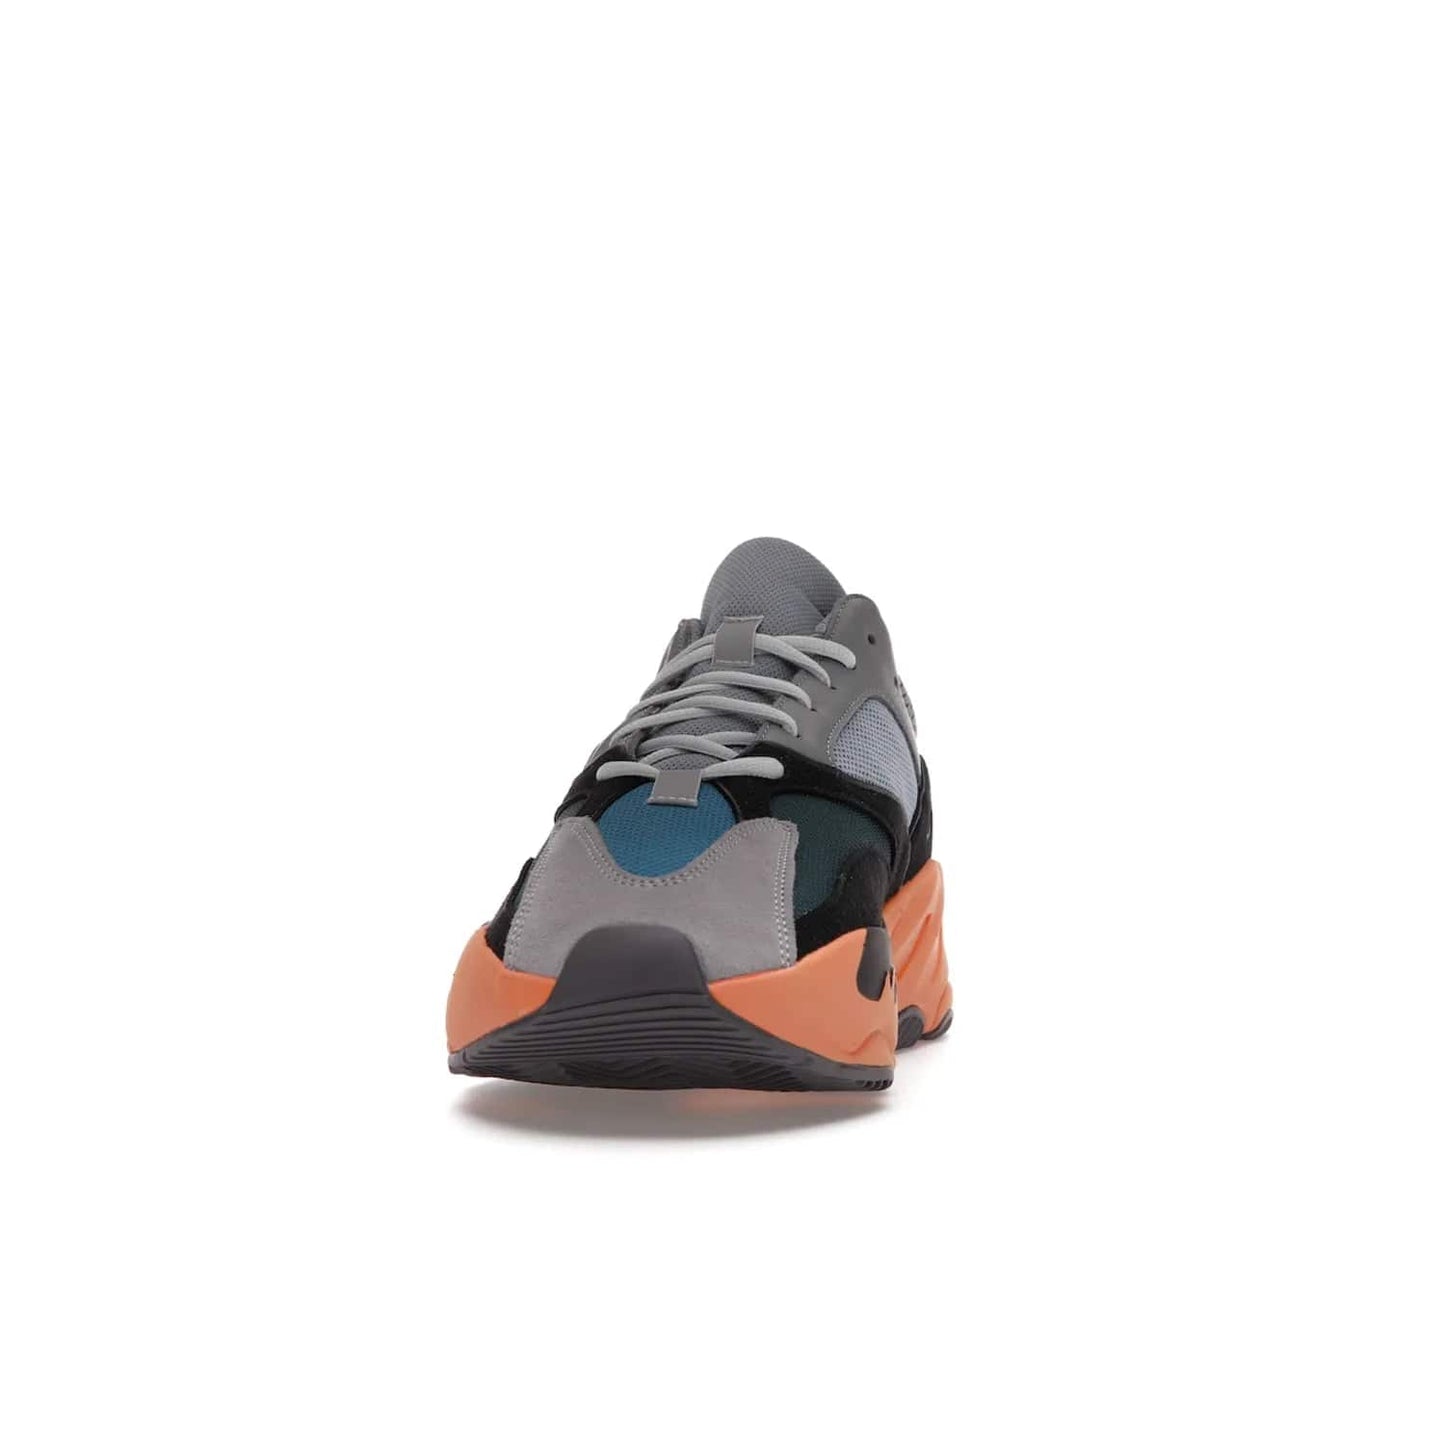 adidas Yeezy Boost 700 Wash Orange - Image 11 - Only at www.BallersClubKickz.com - Introducing the adidas Yeezy Boost 700 Wash Orange. Unique grey leather, suede, mesh upper and teal panels with a chunky Wash Orange Boost midsole. Release October 2021, make a statement today!